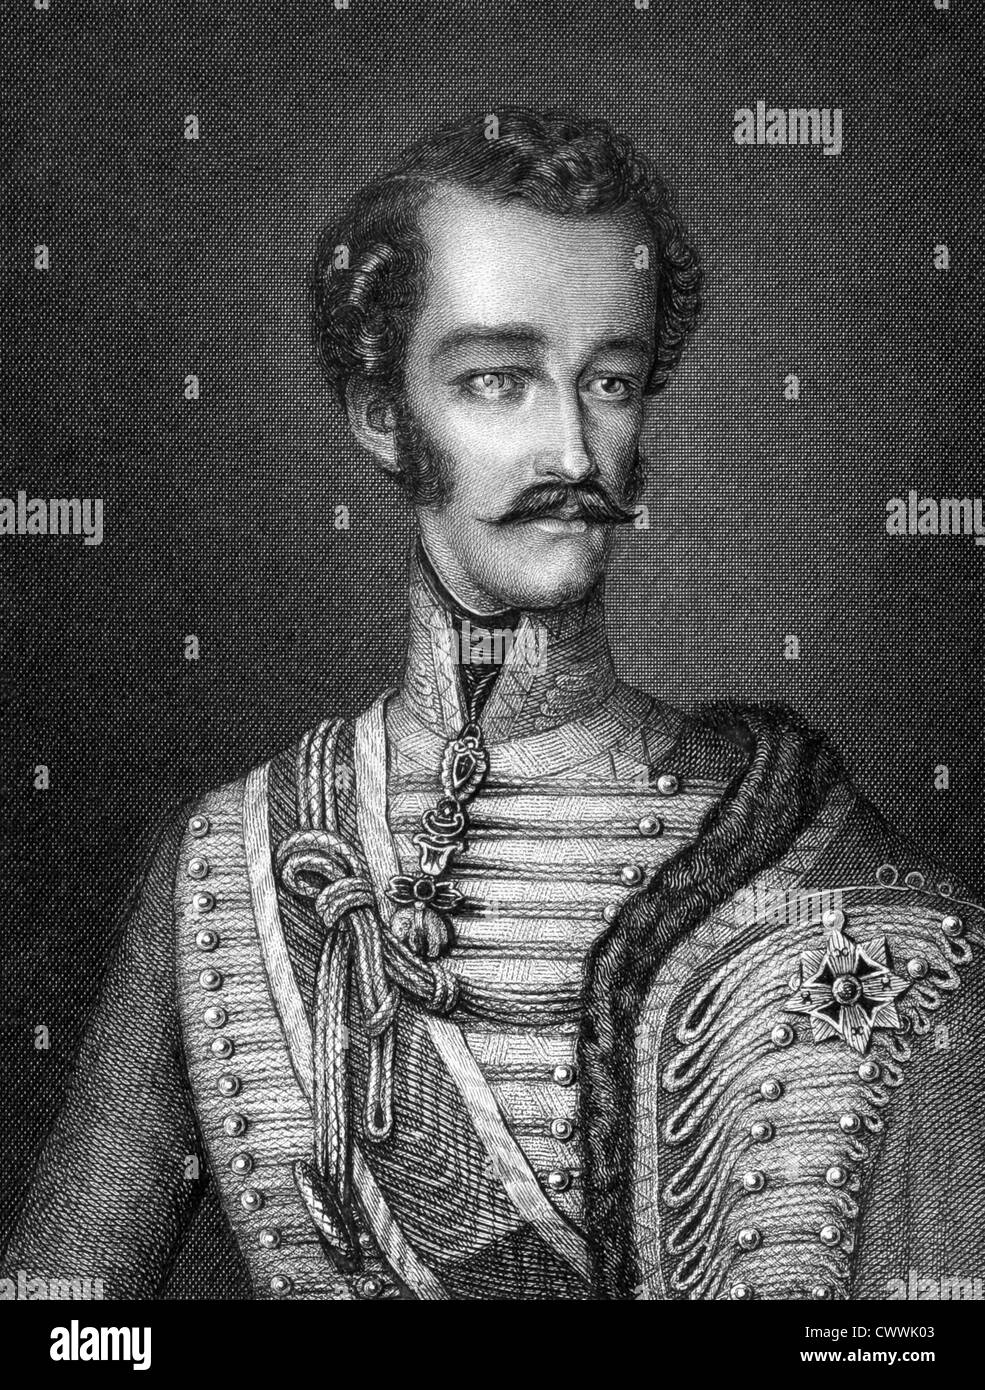 Archduke Stephen, Palatine of Hungary (1817-1867) on engraving from 1859. Member of the House of Habsburg-Lorraine. Stock Photo